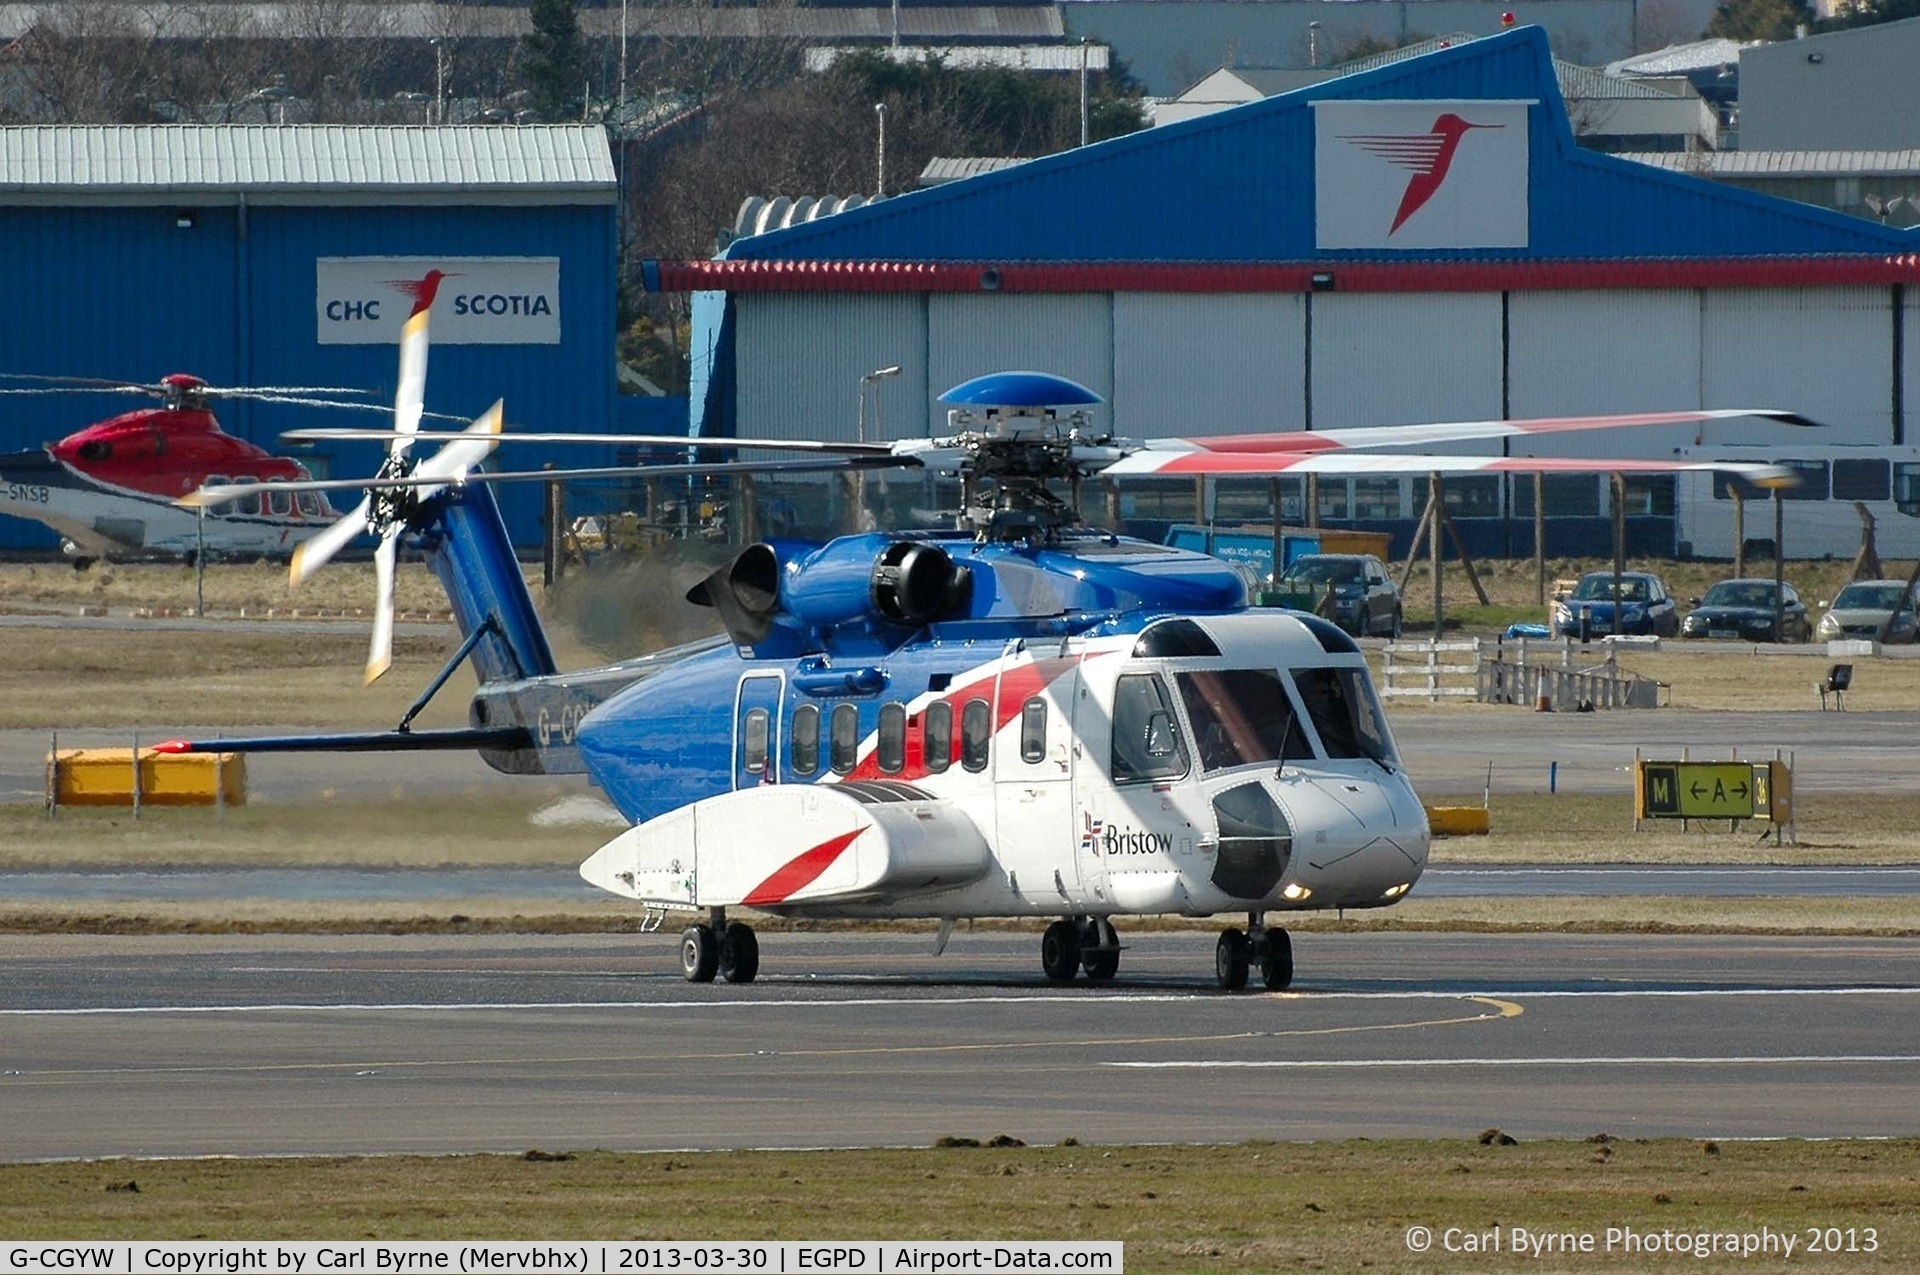 G-CGYW, 2011 Sikorsky S-92A C/N 920157, Taken from 'The Mound' near Bond Helicopters.